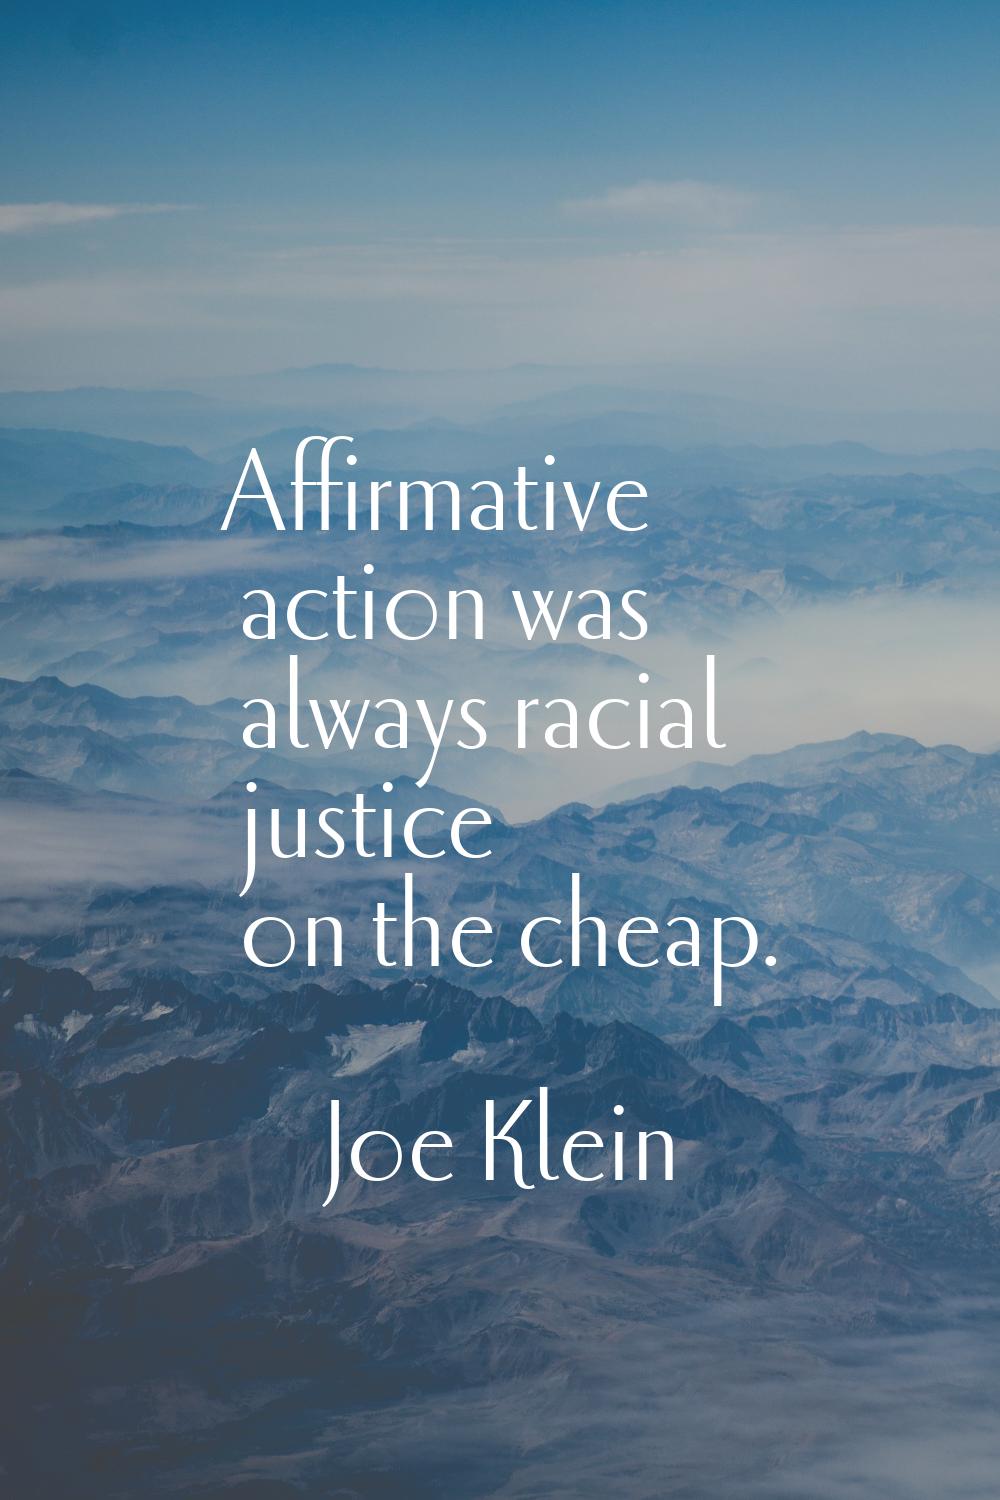 Affirmative action was always racial justice on the cheap.